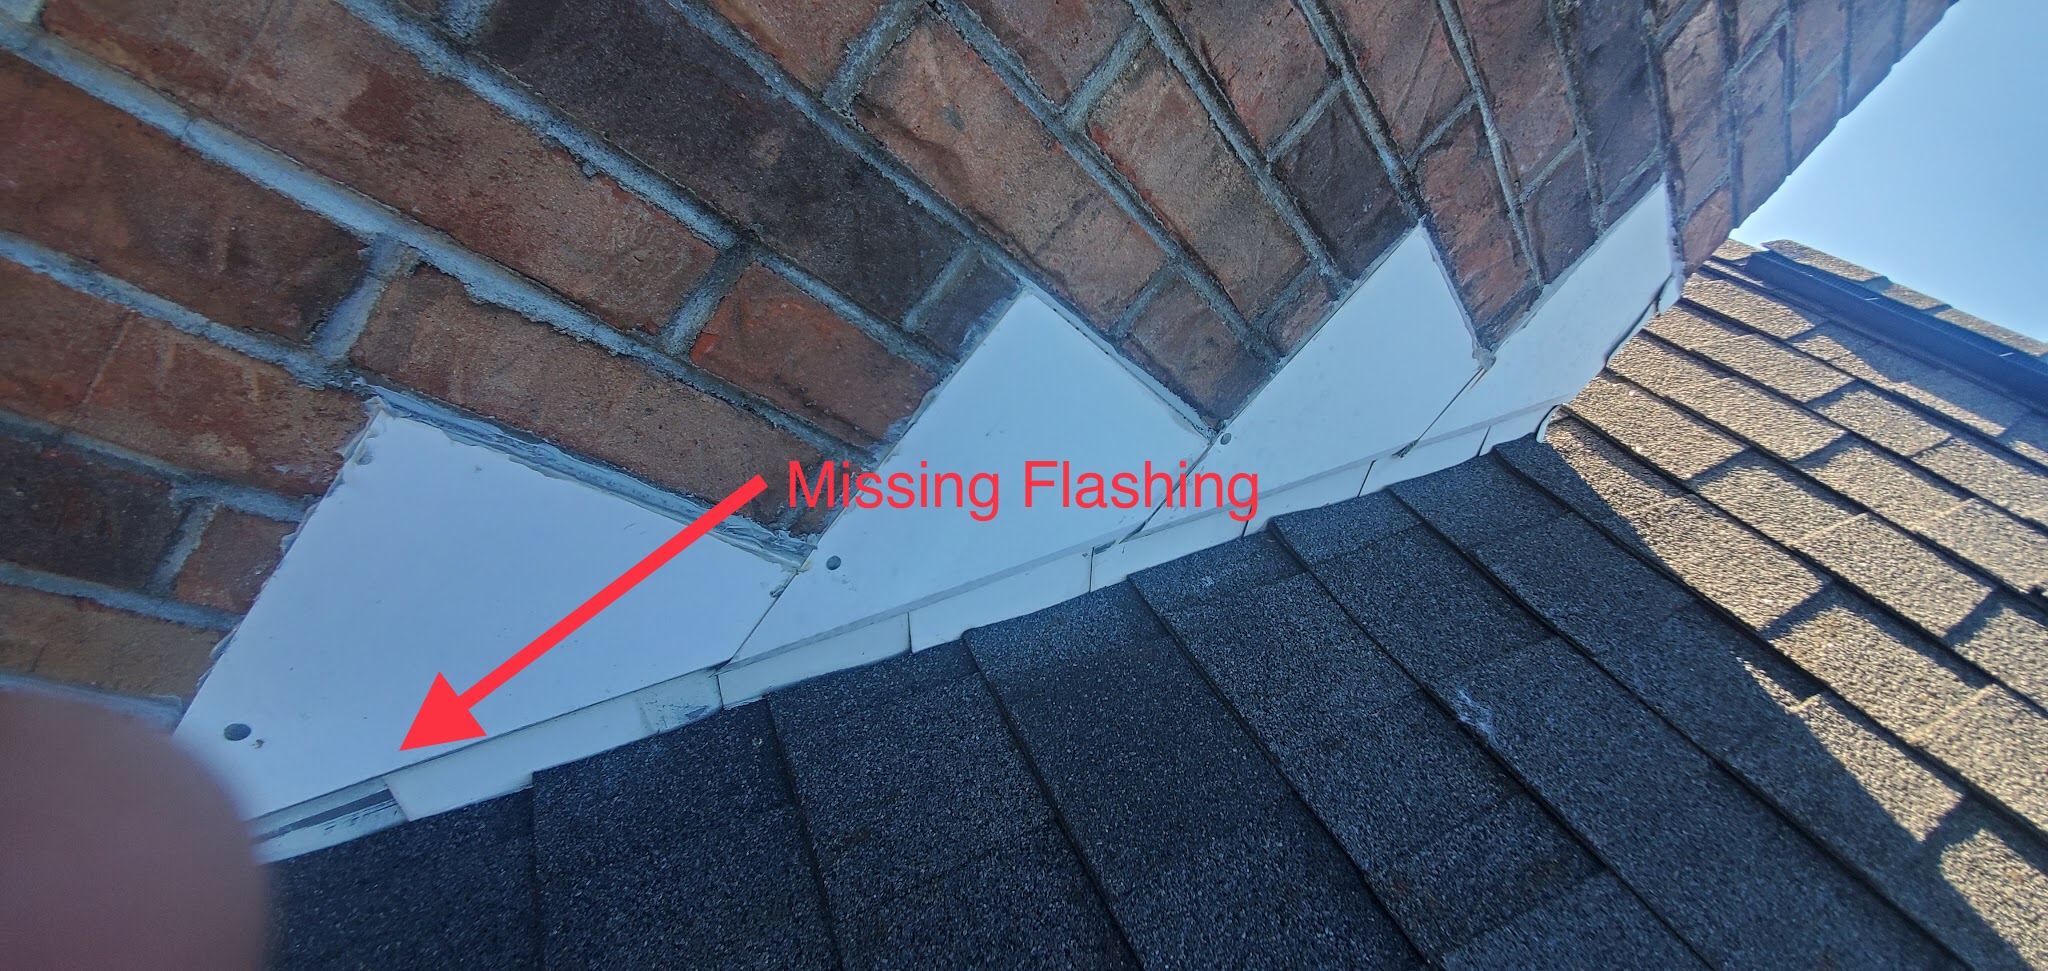 This is a picture of missing flashing on this chimney